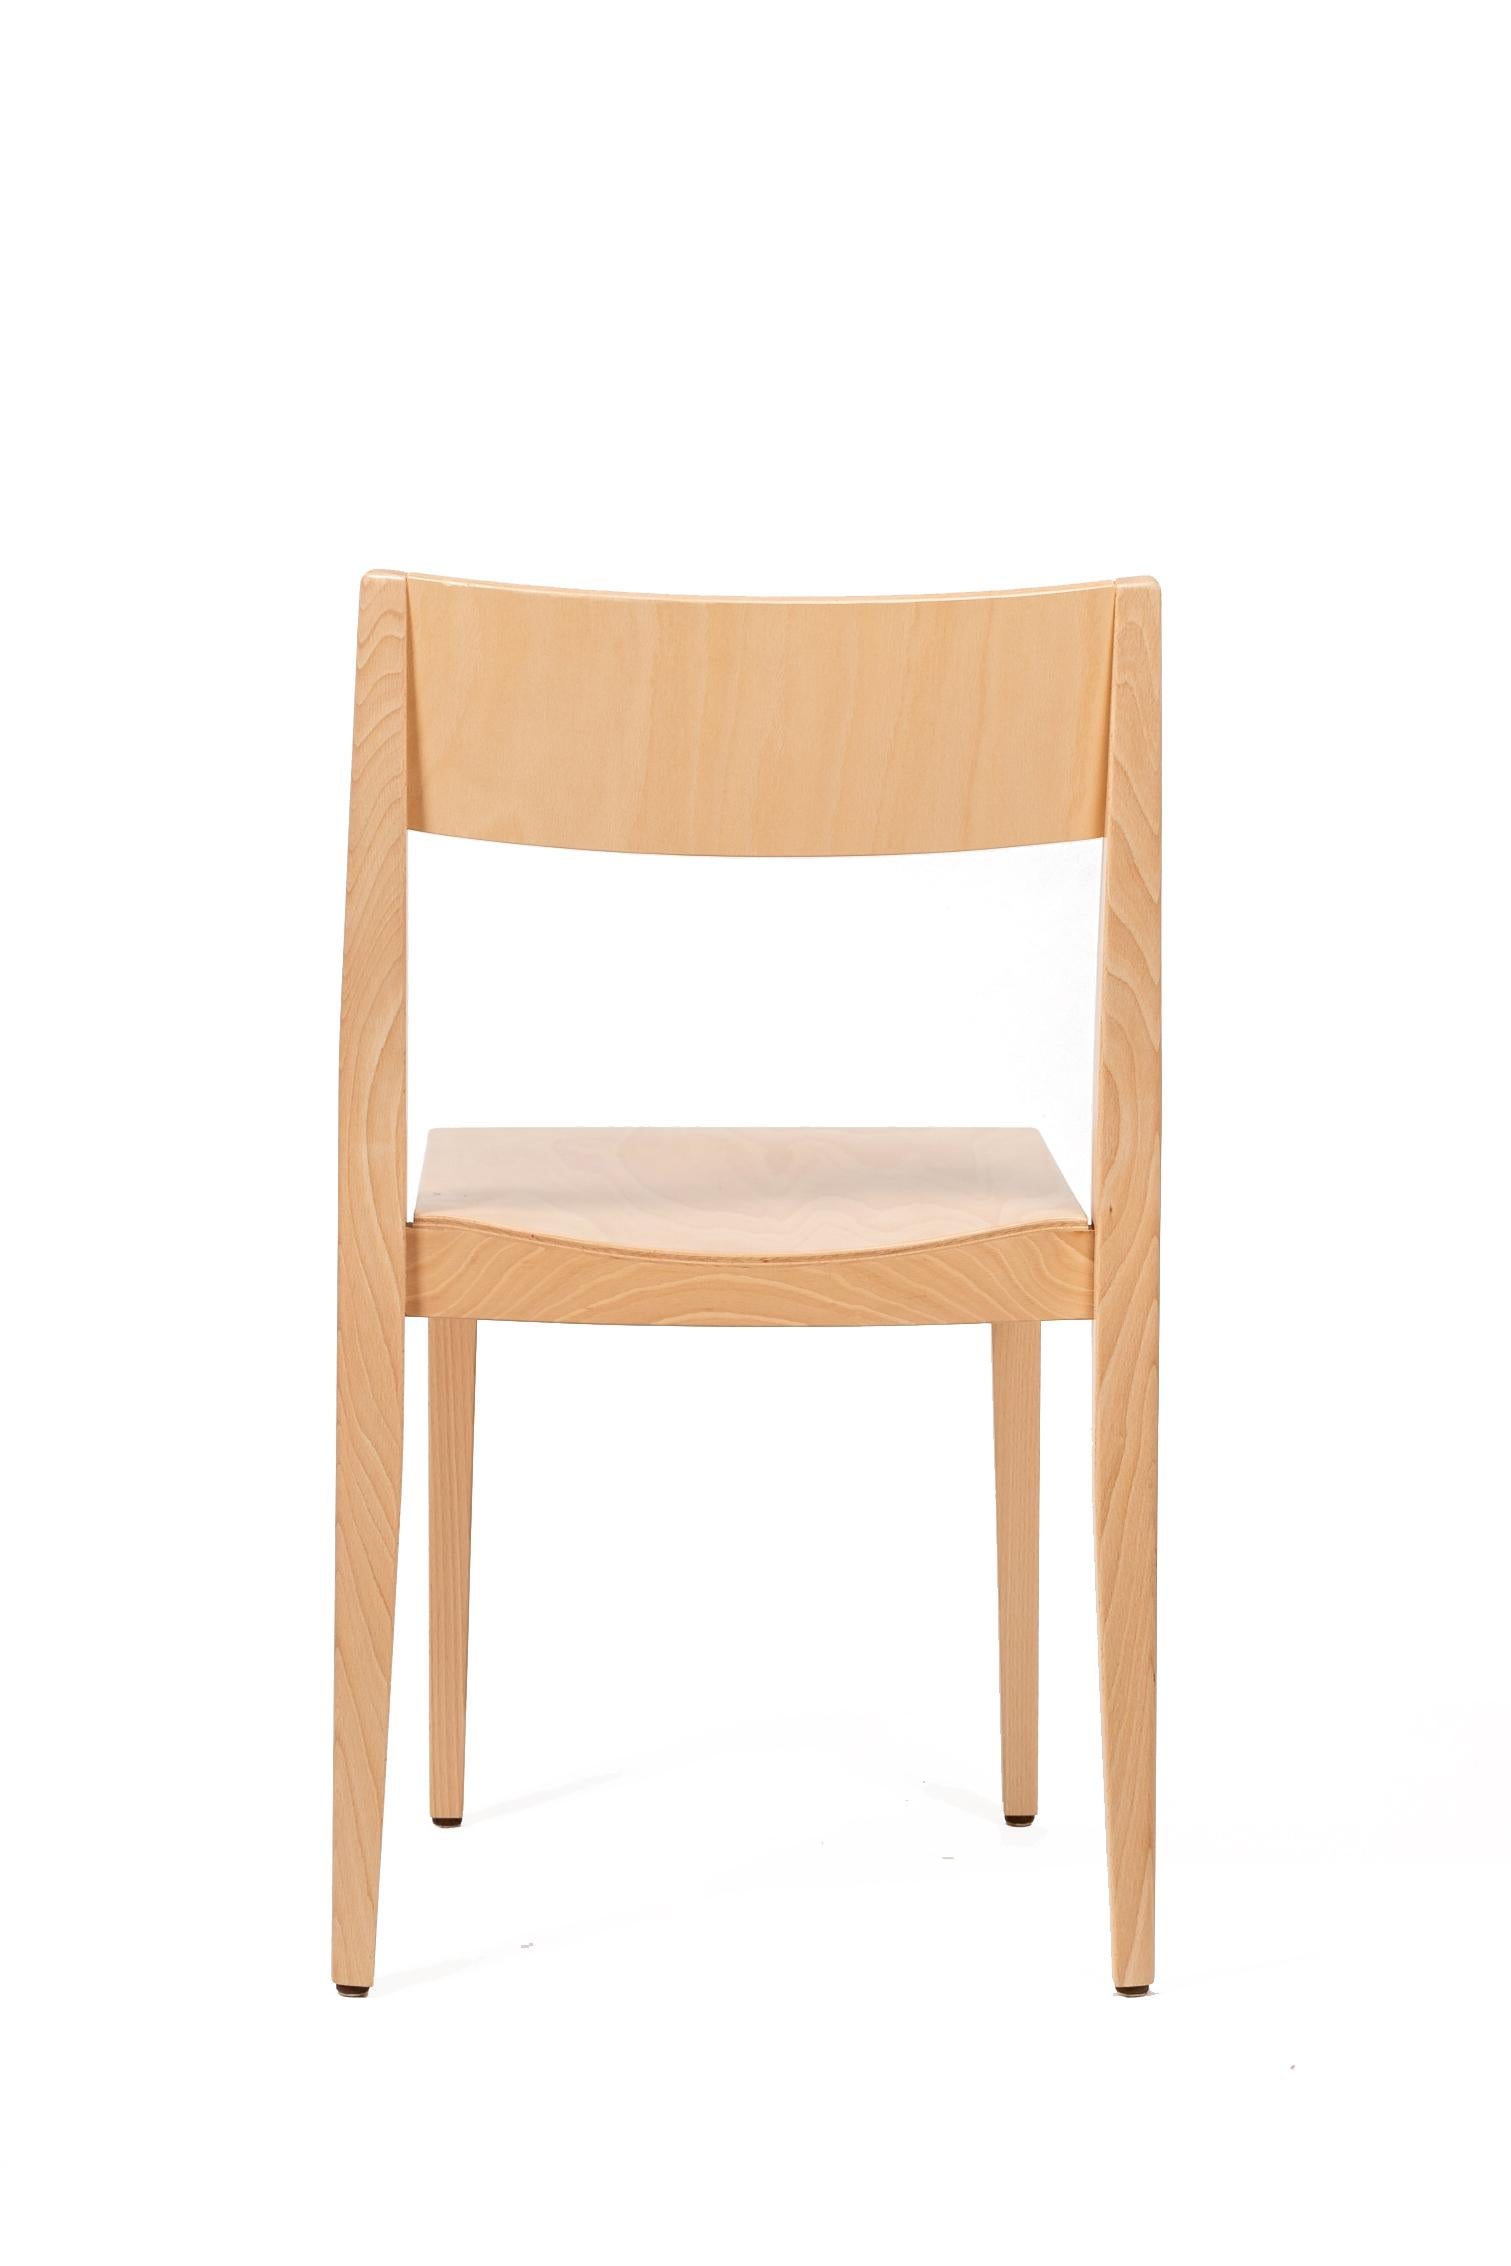 Hungarian Dietiker Soma Minimalist Dining Chair in Beech Wood Designed by Thomas Albrecht